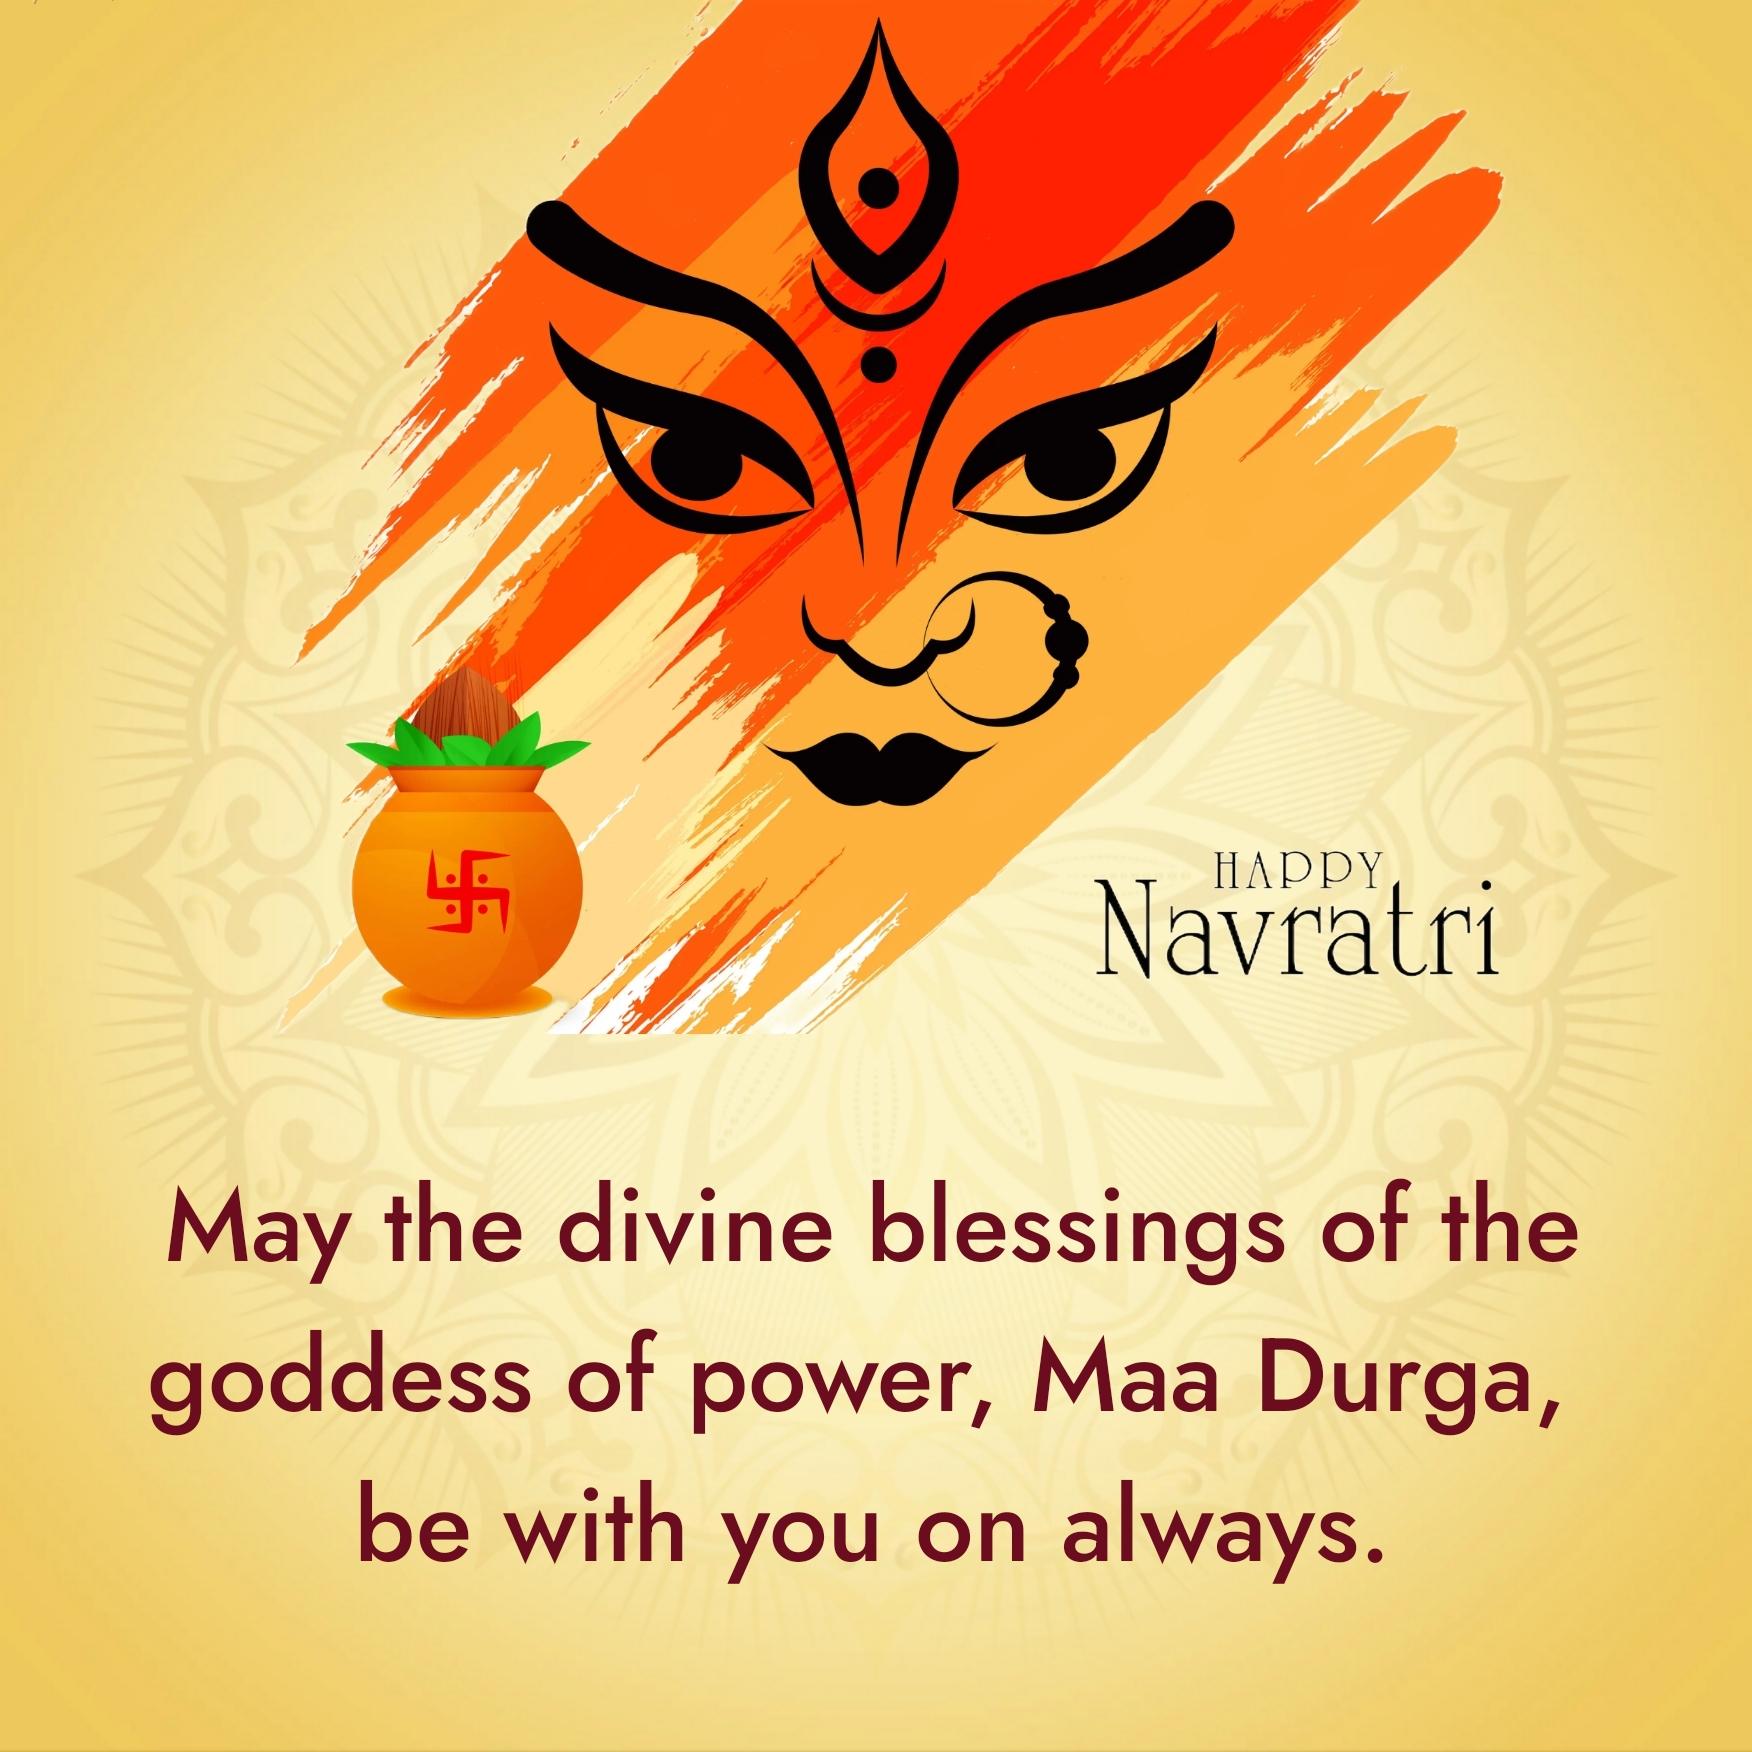 May the divine blessings of Goddess Durga bring